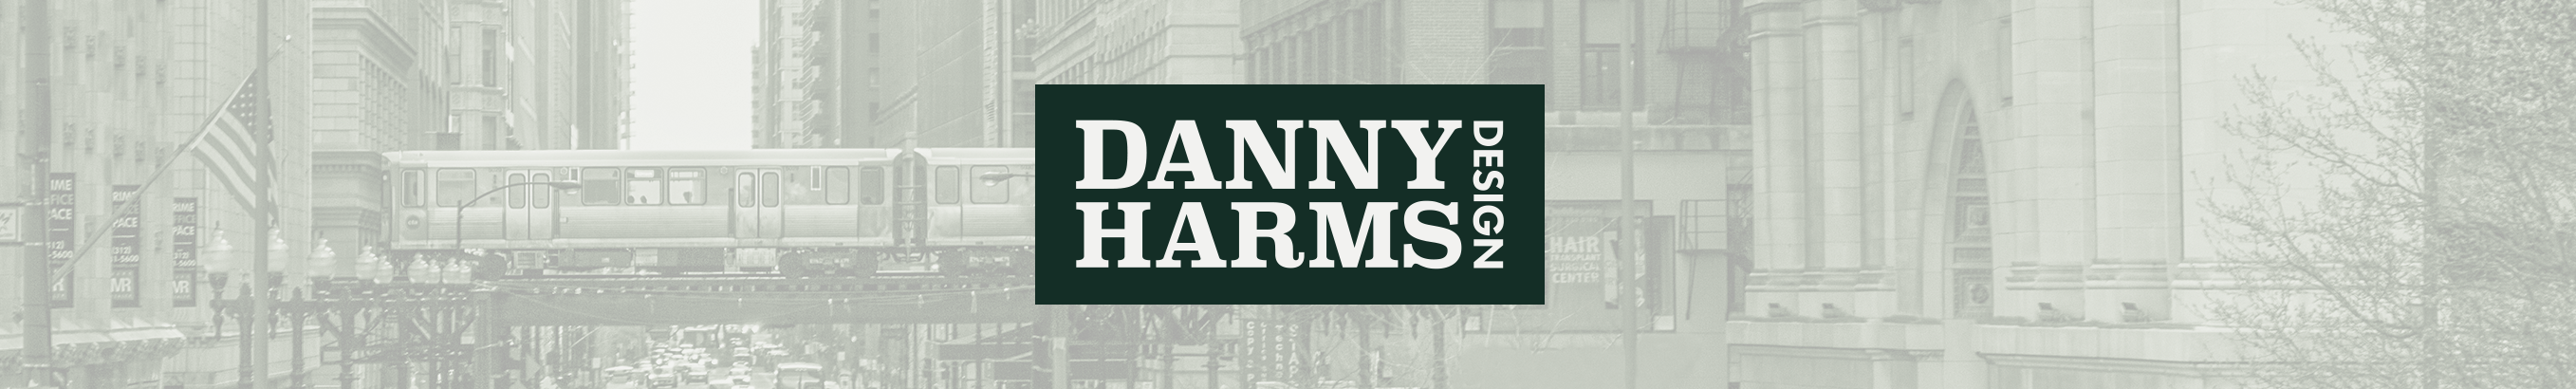 Danny Harms's profile banner